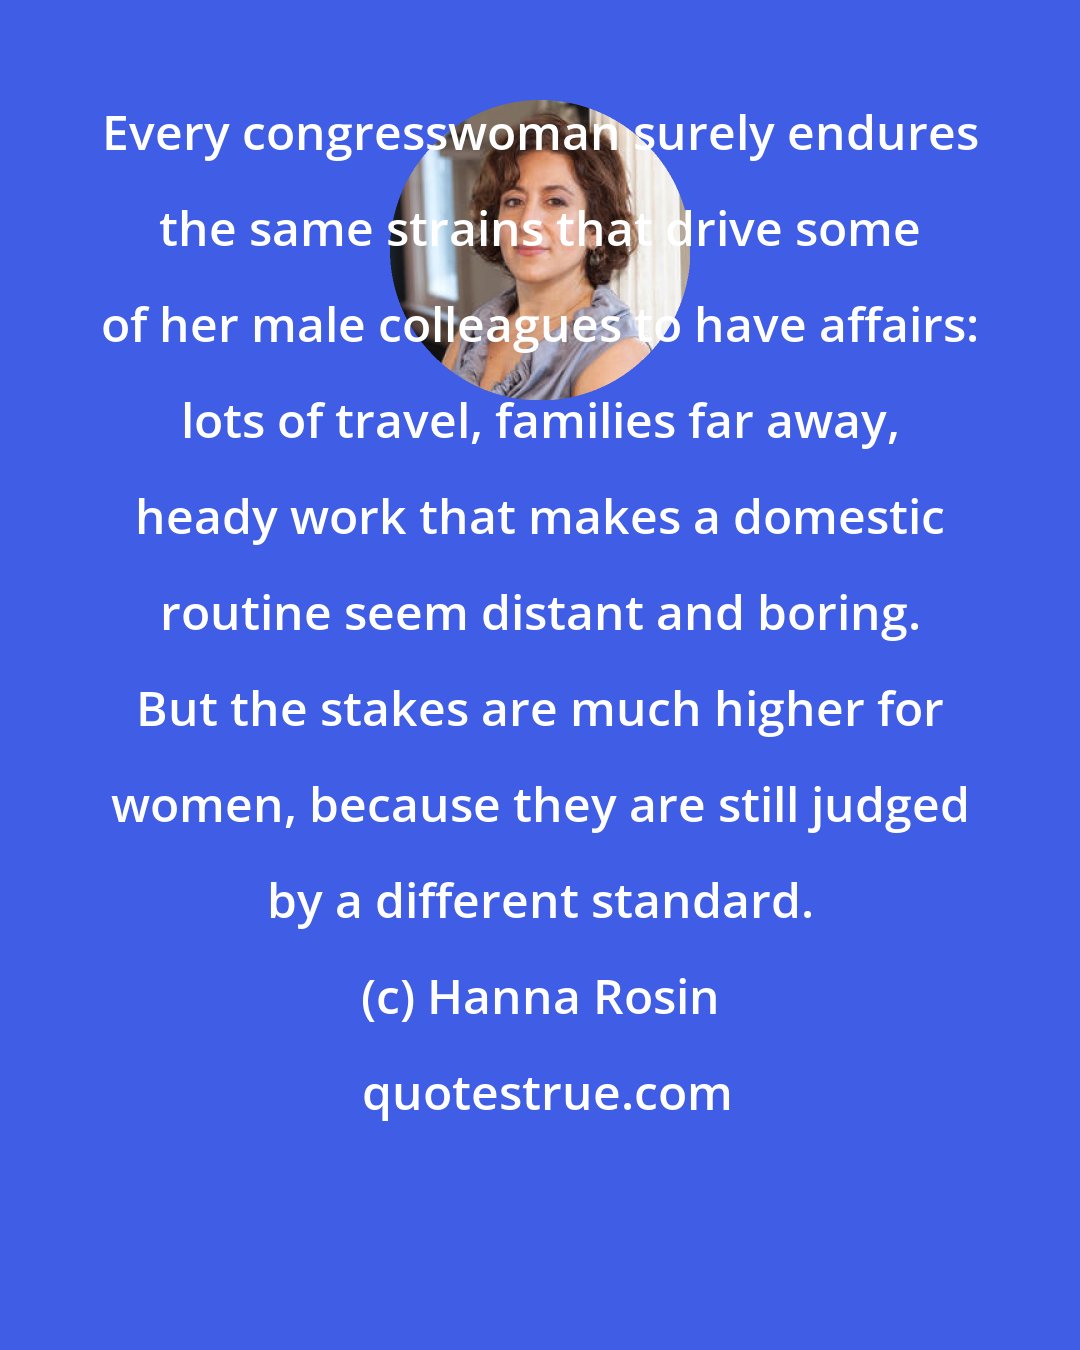 Hanna Rosin: Every congresswoman surely endures the same strains that drive some of her male colleagues to have affairs: lots of travel, families far away, heady work that makes a domestic routine seem distant and boring. But the stakes are much higher for women, because they are still judged by a different standard.